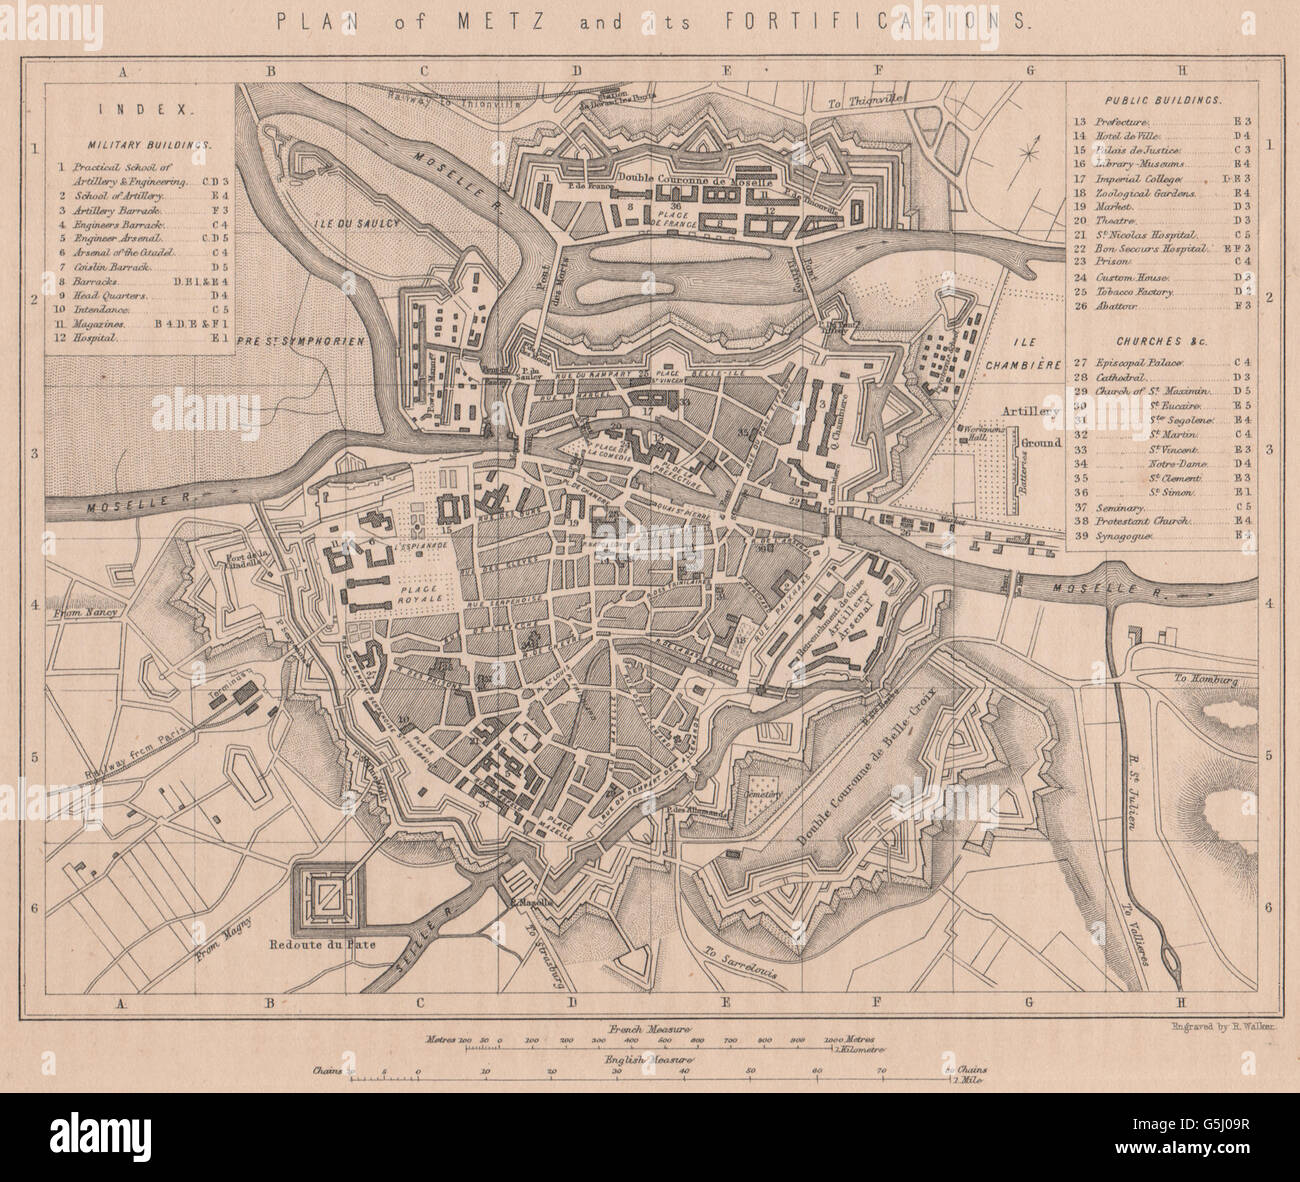 FRANCO-PRUSSIAN WAR: Plan of Metz and its Fortifications. Moselle, 1875 map Stock Photo